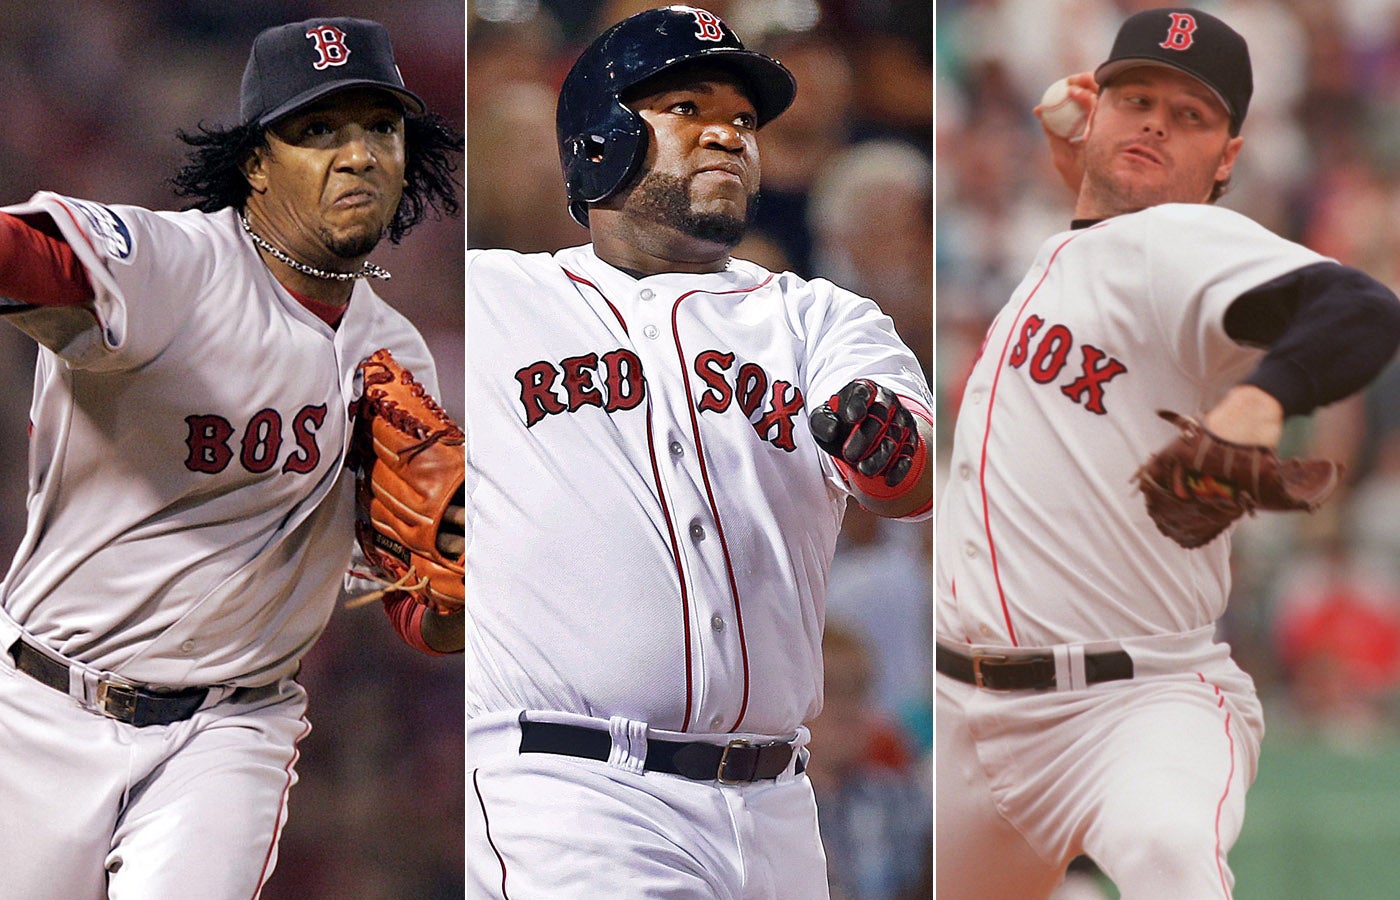 The all-time Red Sox World Series team